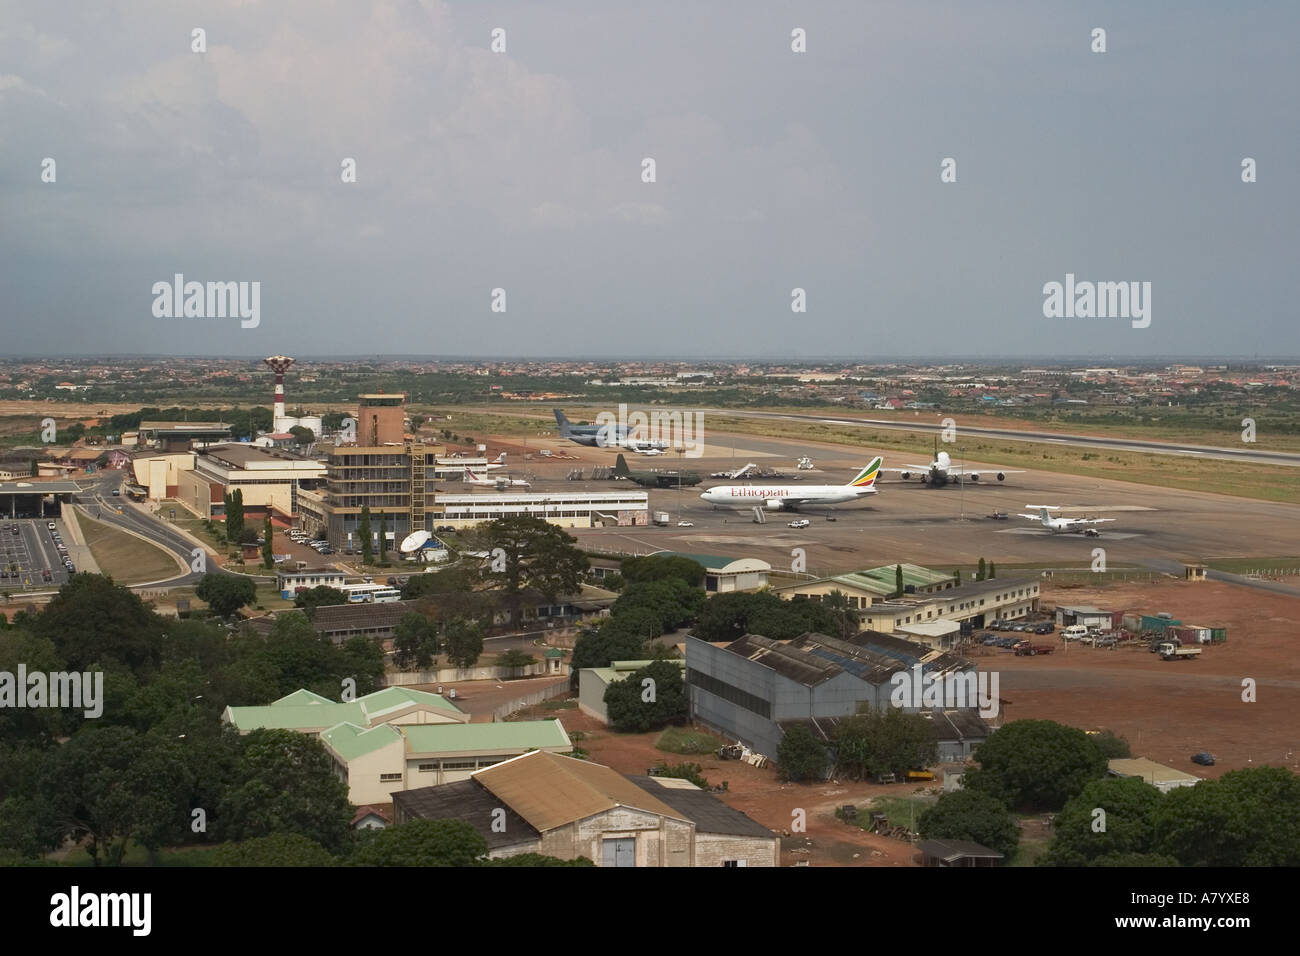 Aerial view from helicopter of Kotoka International Airport, Accra, capital of Ghana, West Africa Stock Photo